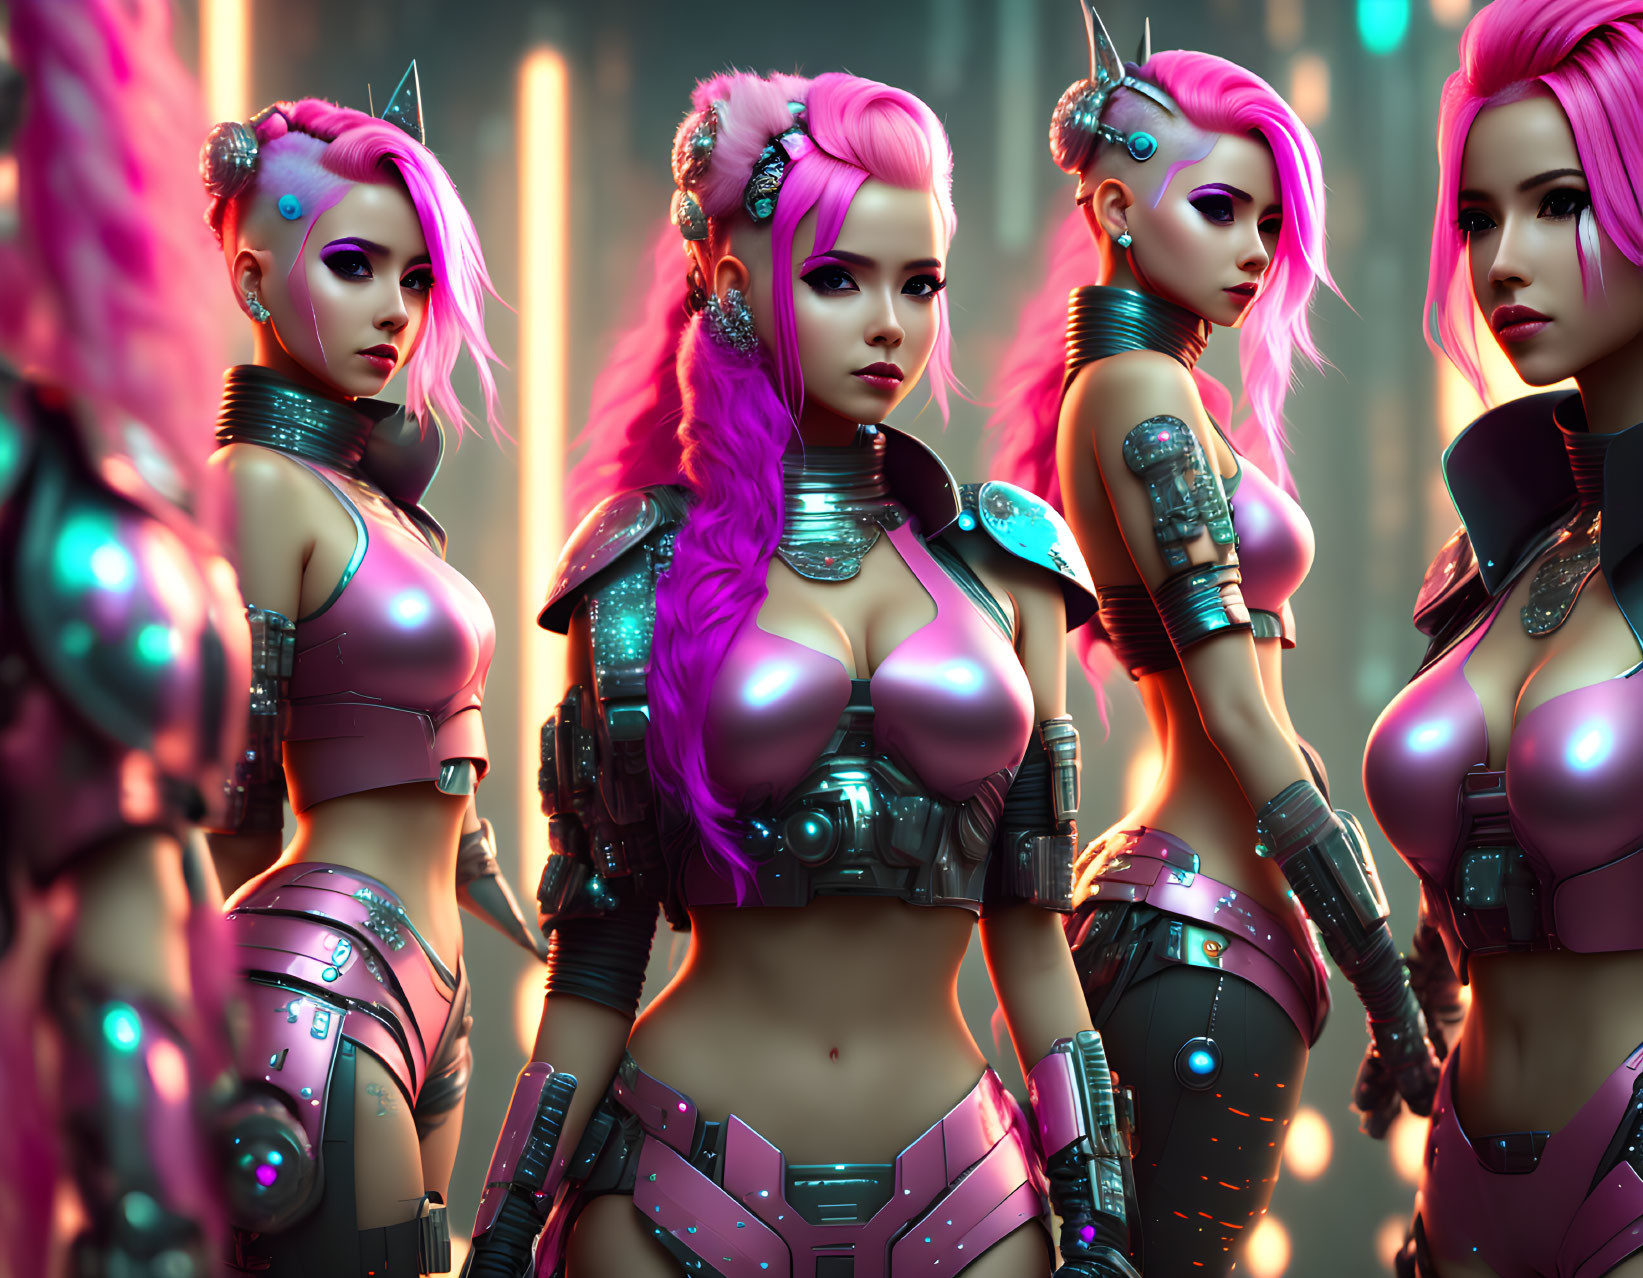 Futuristic female characters with pink hair and cybernetic armor in neon-lit scene